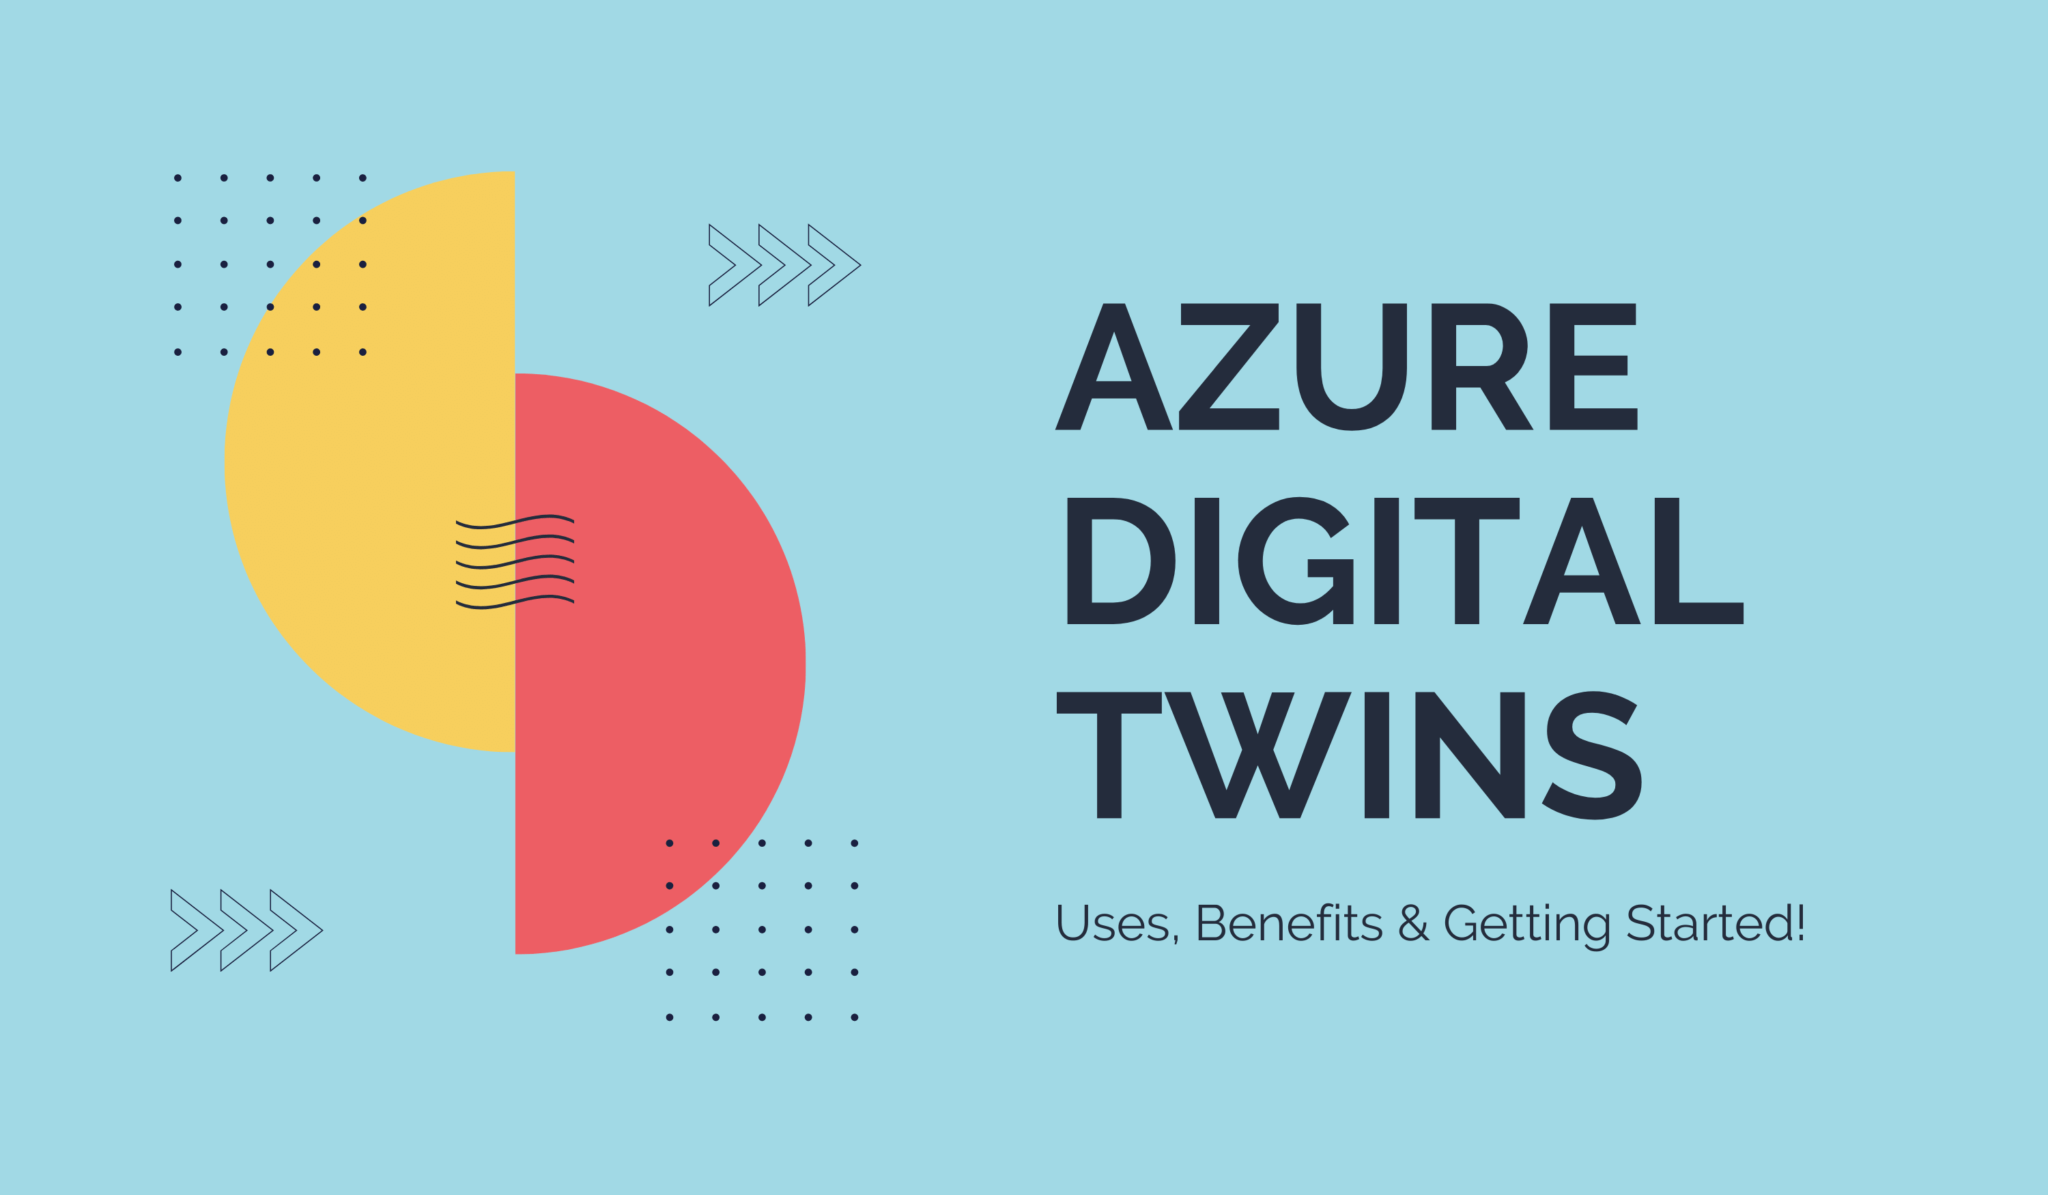 How to Use Azure Digital Twins to Enhance IoT Systems Getting Started